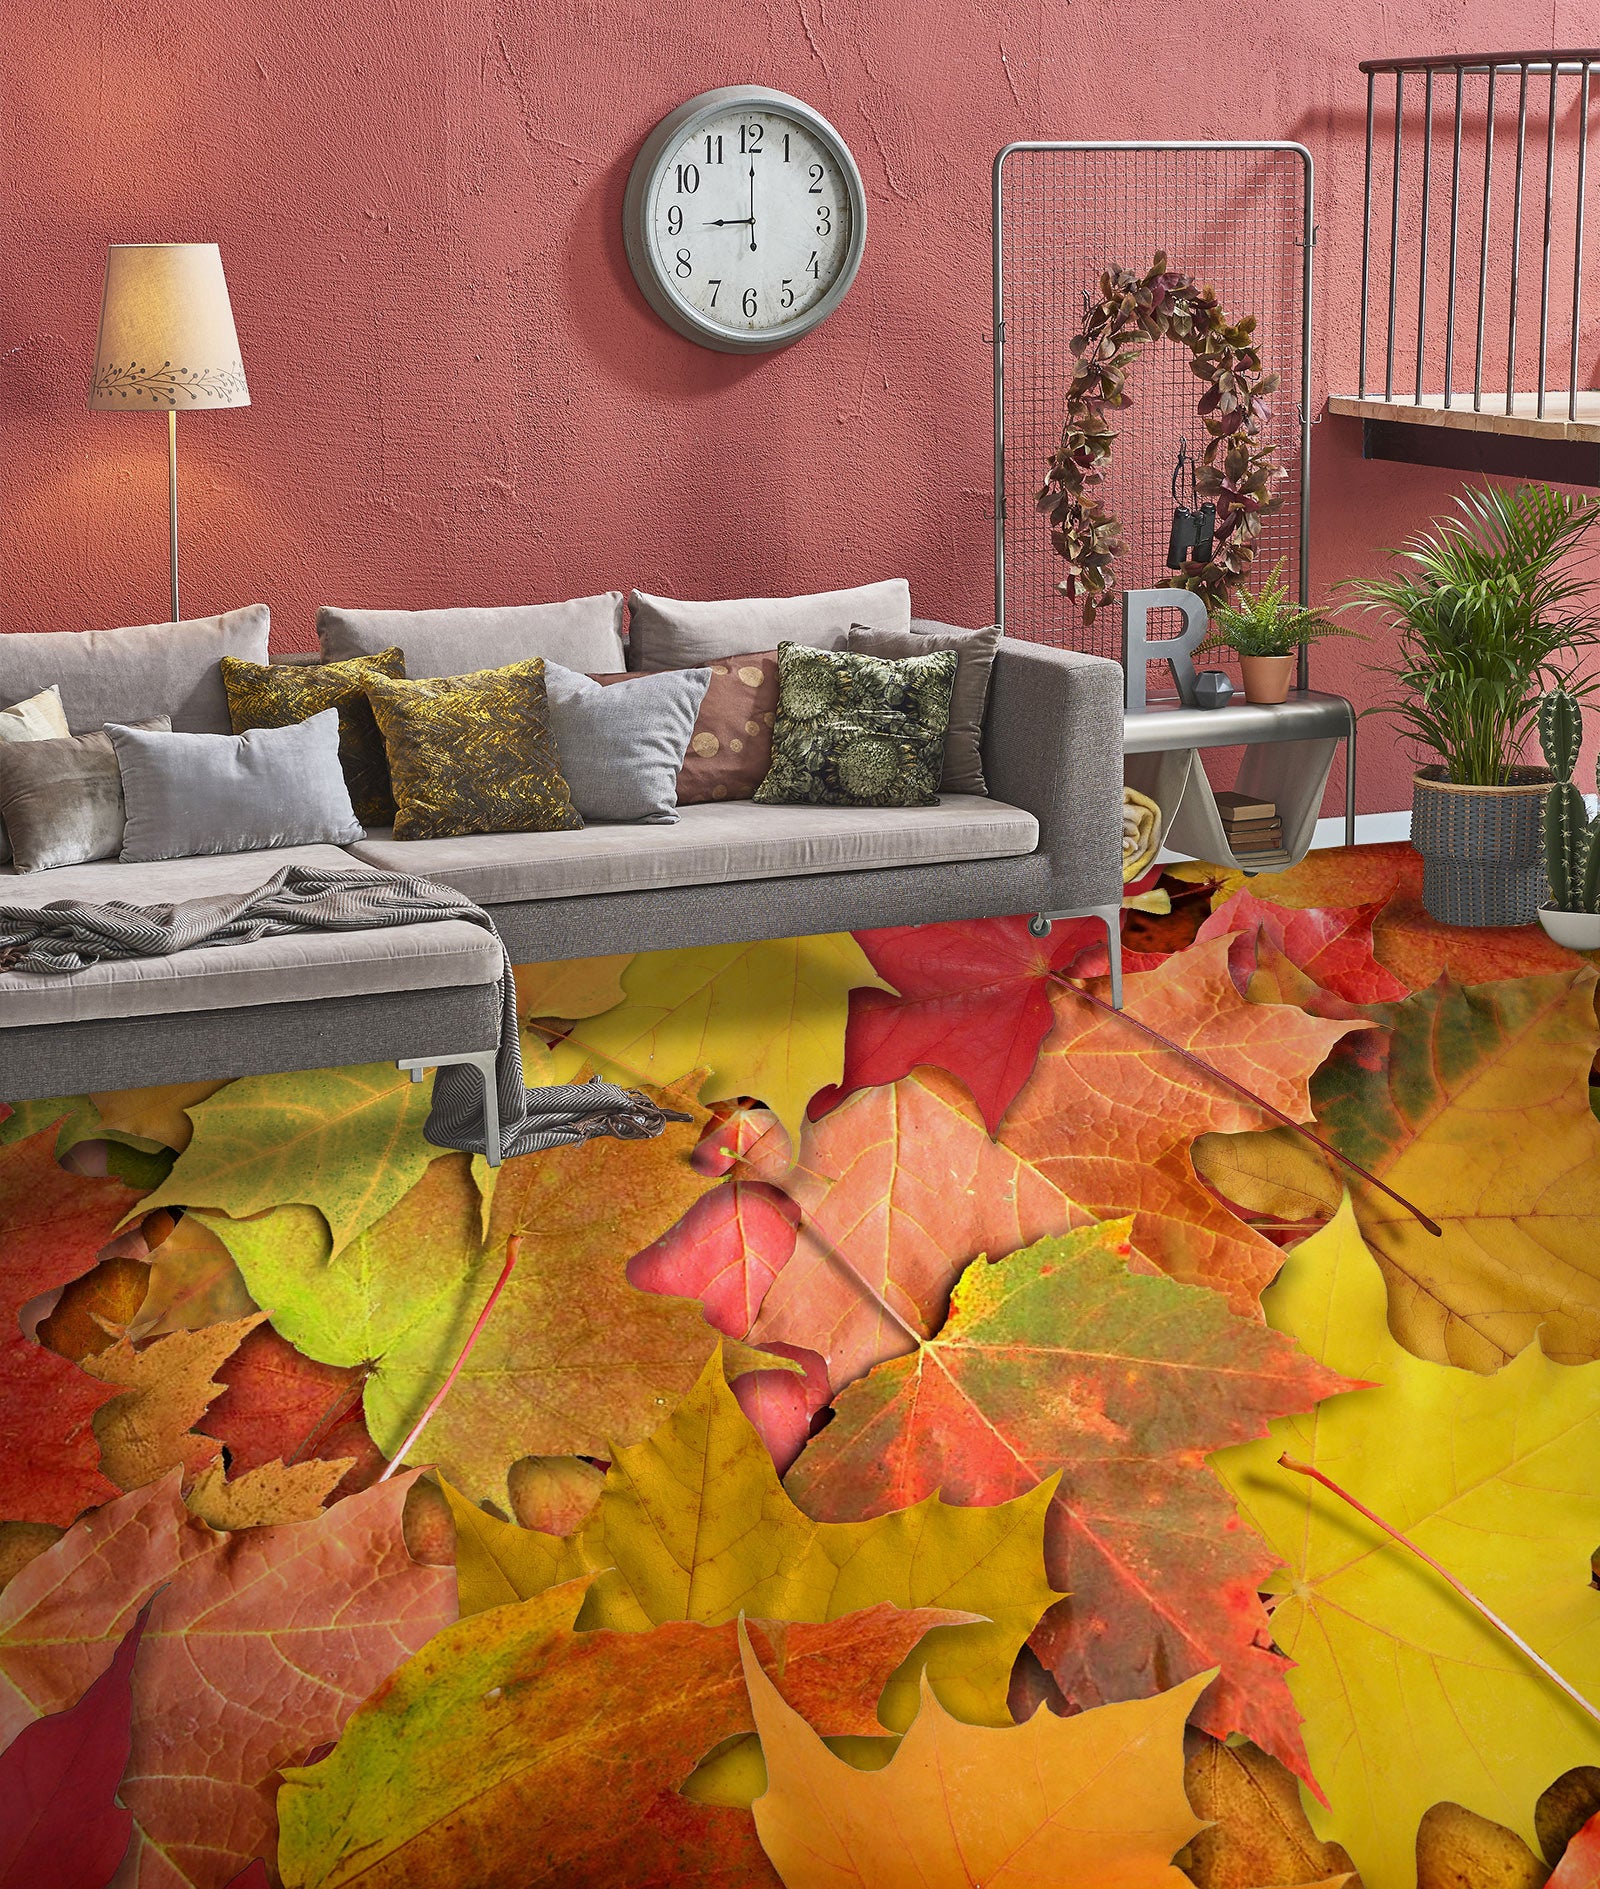 3D Autumn Cascading Leaves 1365 Floor Mural  Wallpaper Murals Self-Adhesive Removable Print Epoxy